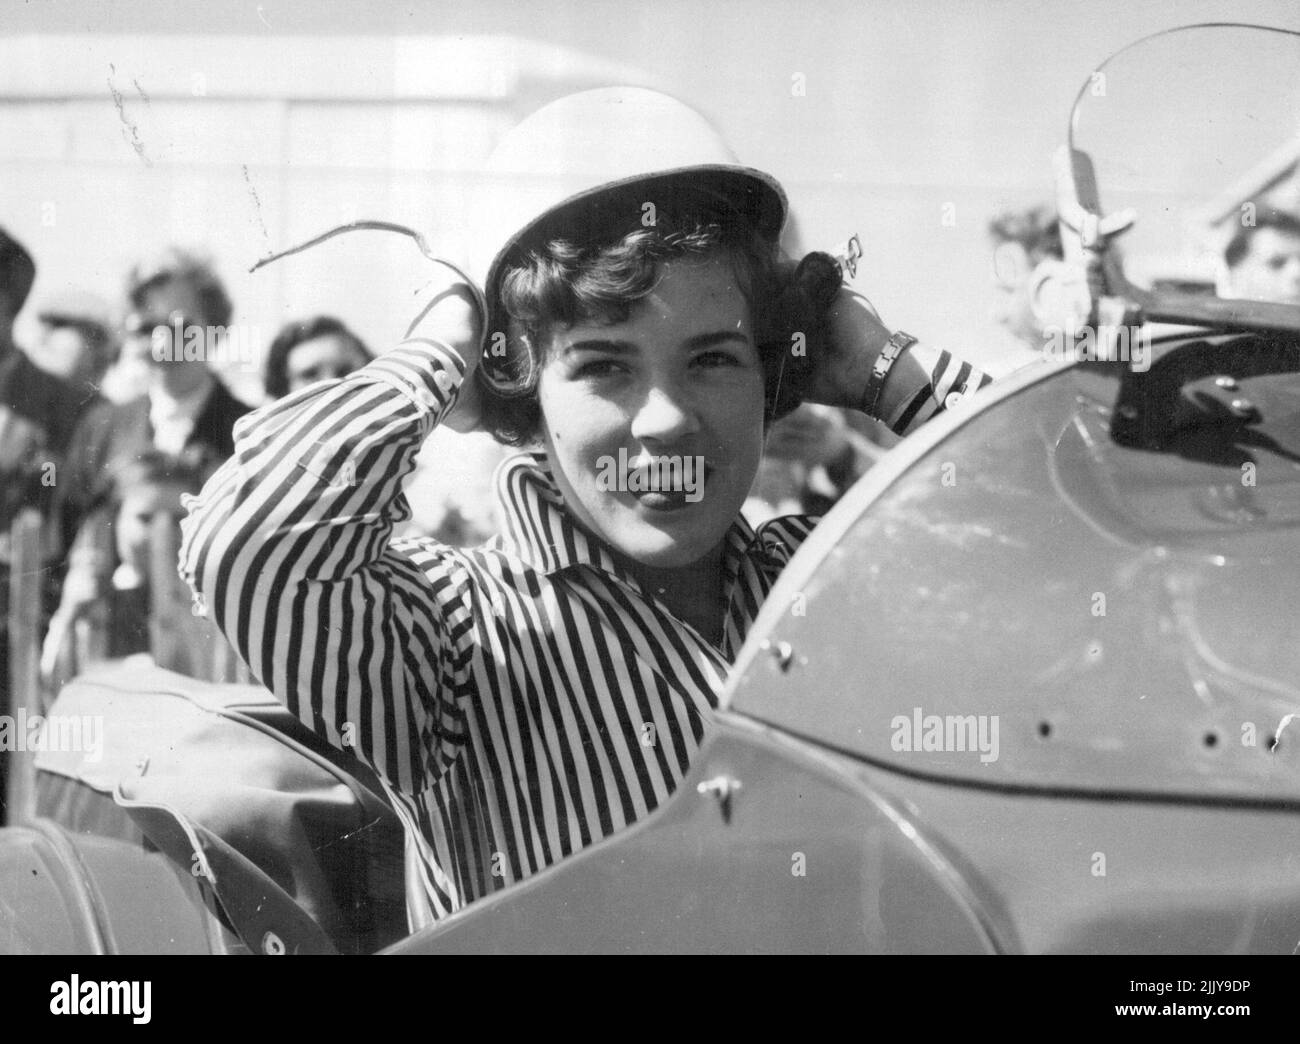 The Name Is Moss -- The bright-eyed girl in the crash helmet is Pat Moss, 20, sister of ace racing driver Stirling Moss, seen getting ready for the ladies' race at Goodwood. But she was unplaced. A crash helmet is Pat Moss constant fashion in have Pat, 20, ***** of ace racing driver Stirling Moss. Here she is getting ready for a ***** race at Goodwood. June 01, 1955. (Photo by Daily Mirror). Stock Photo